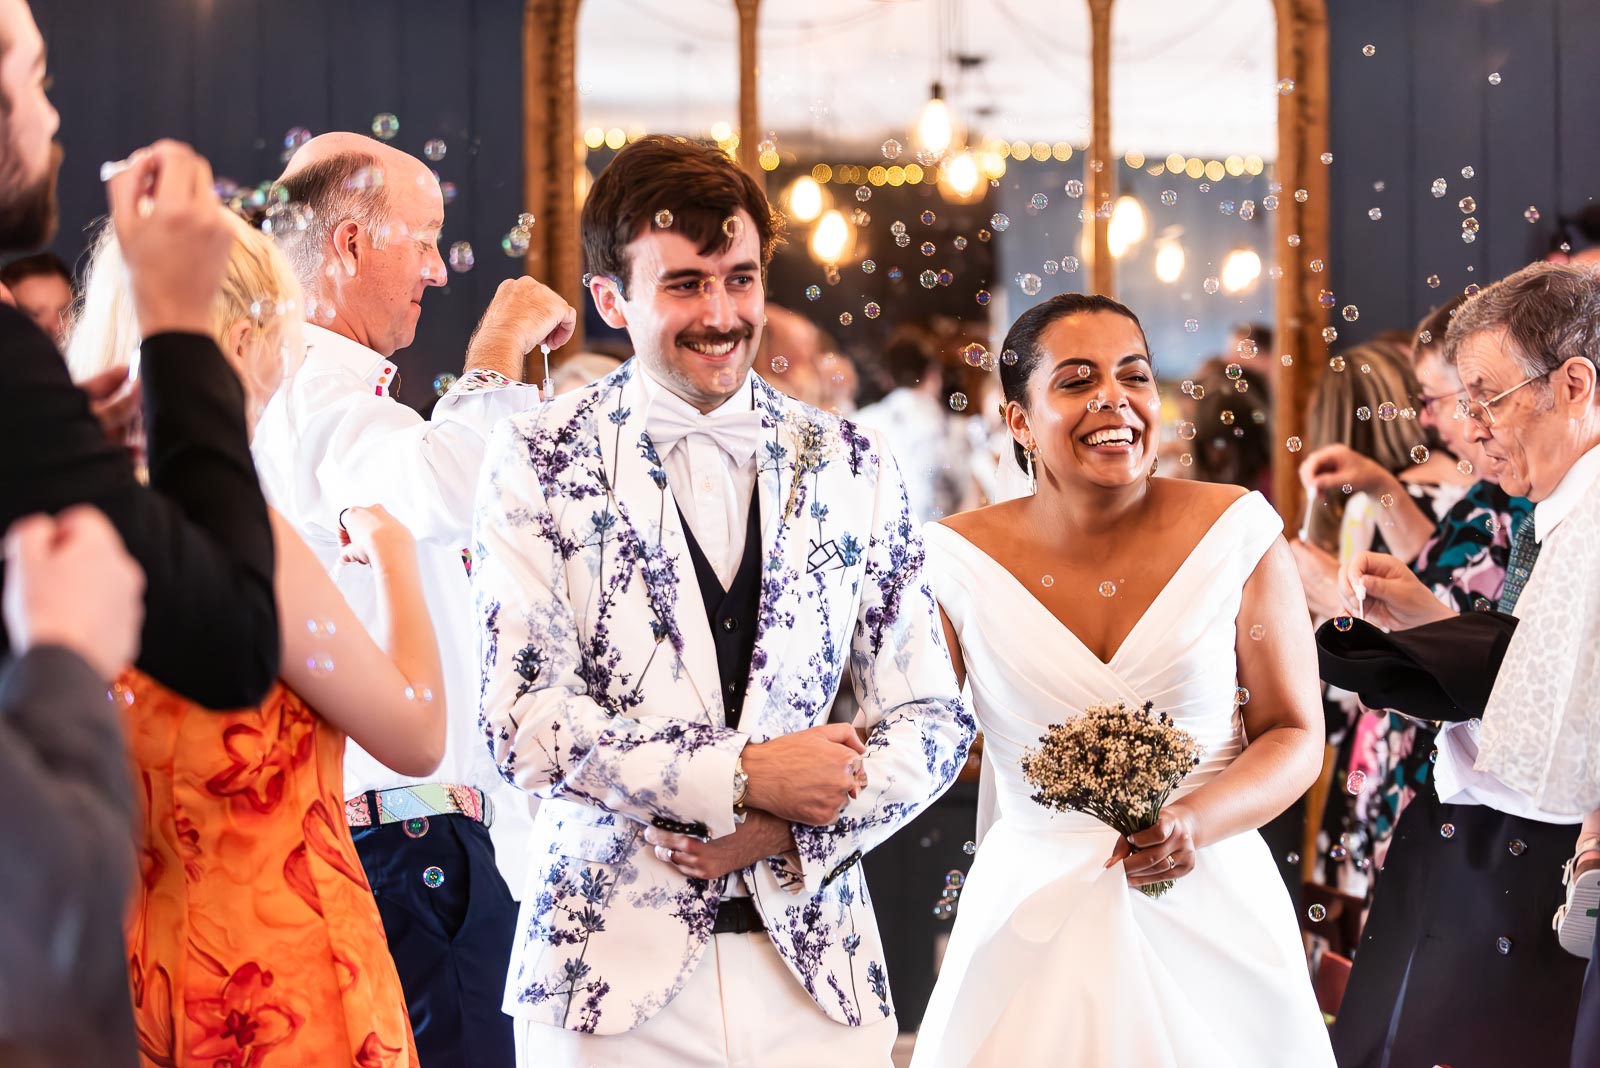 Olivia and Edward walk through bubble confetti blown by their wedding guests after becoming husband and wife at the function room at The Royal Oak in Lewes surrounded by friends and family.